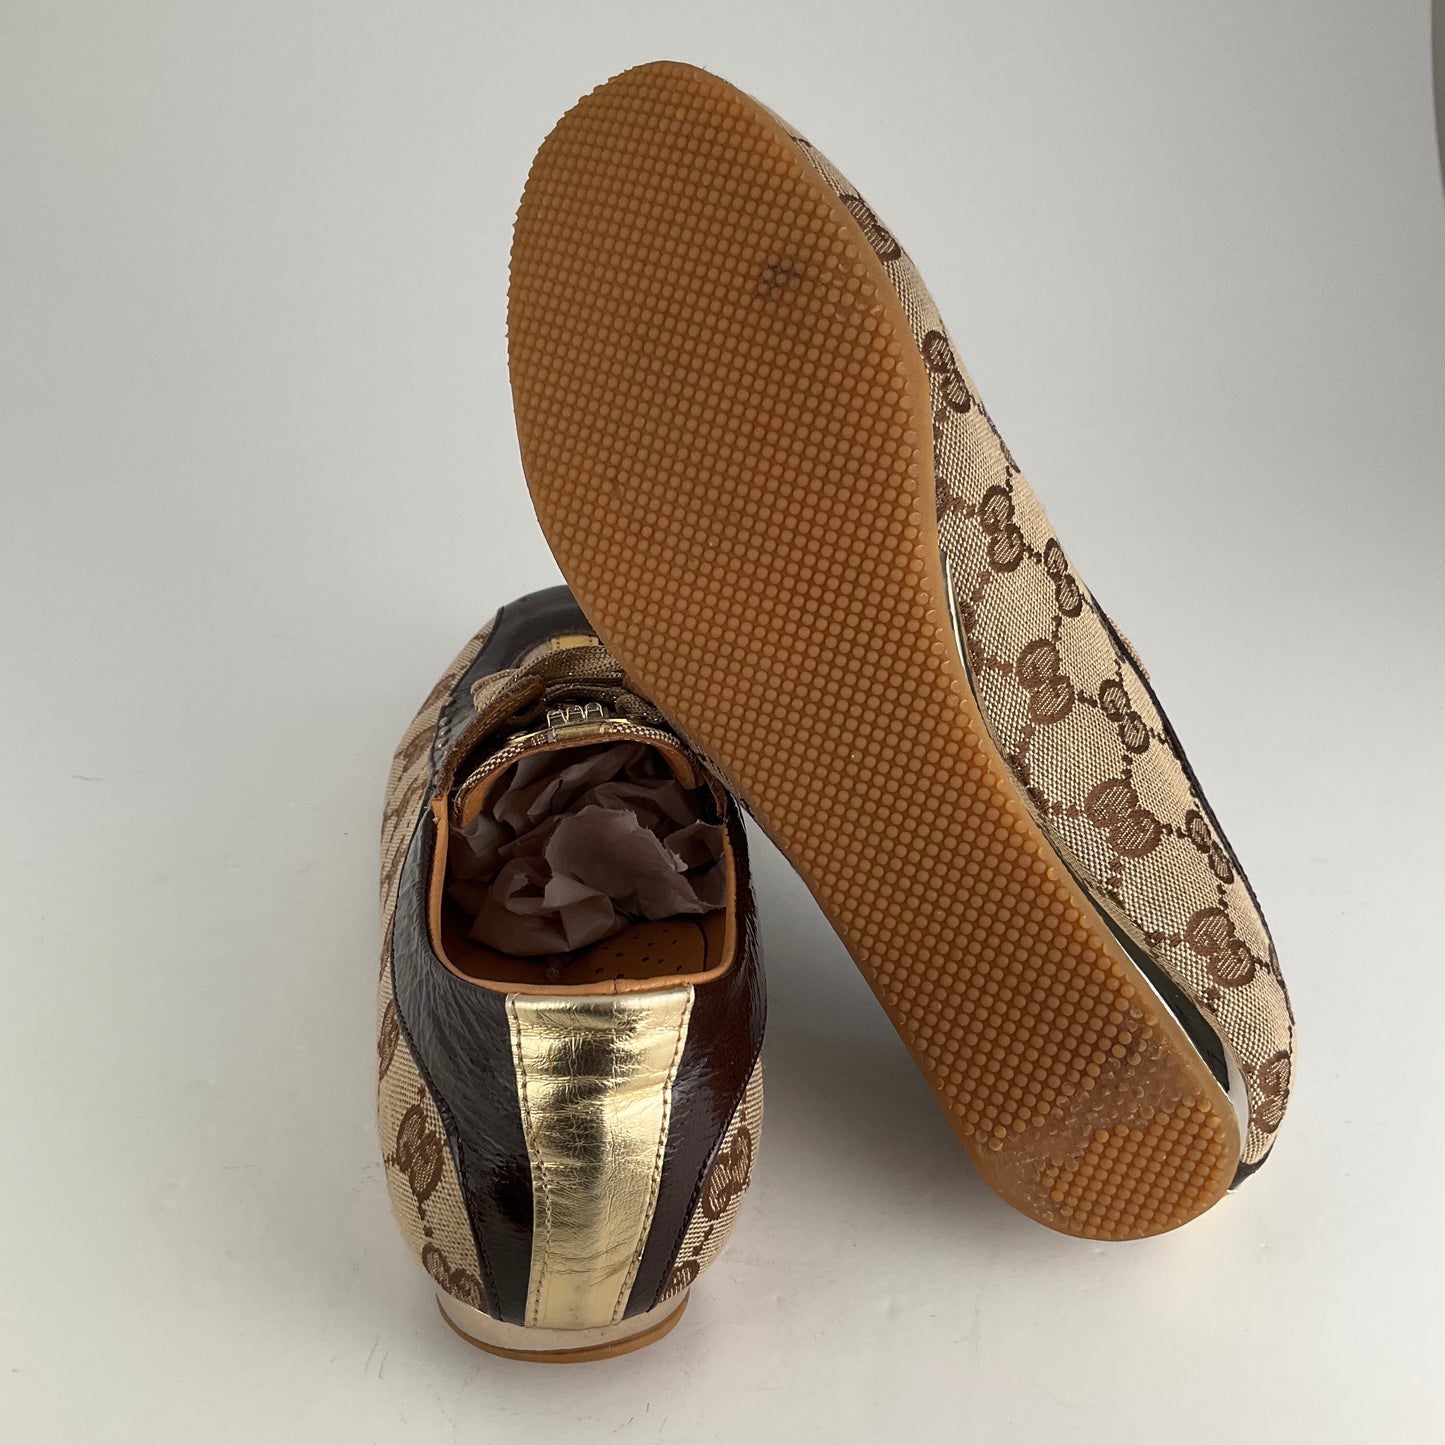 Gucci - Two Tone Shoes - Size 39